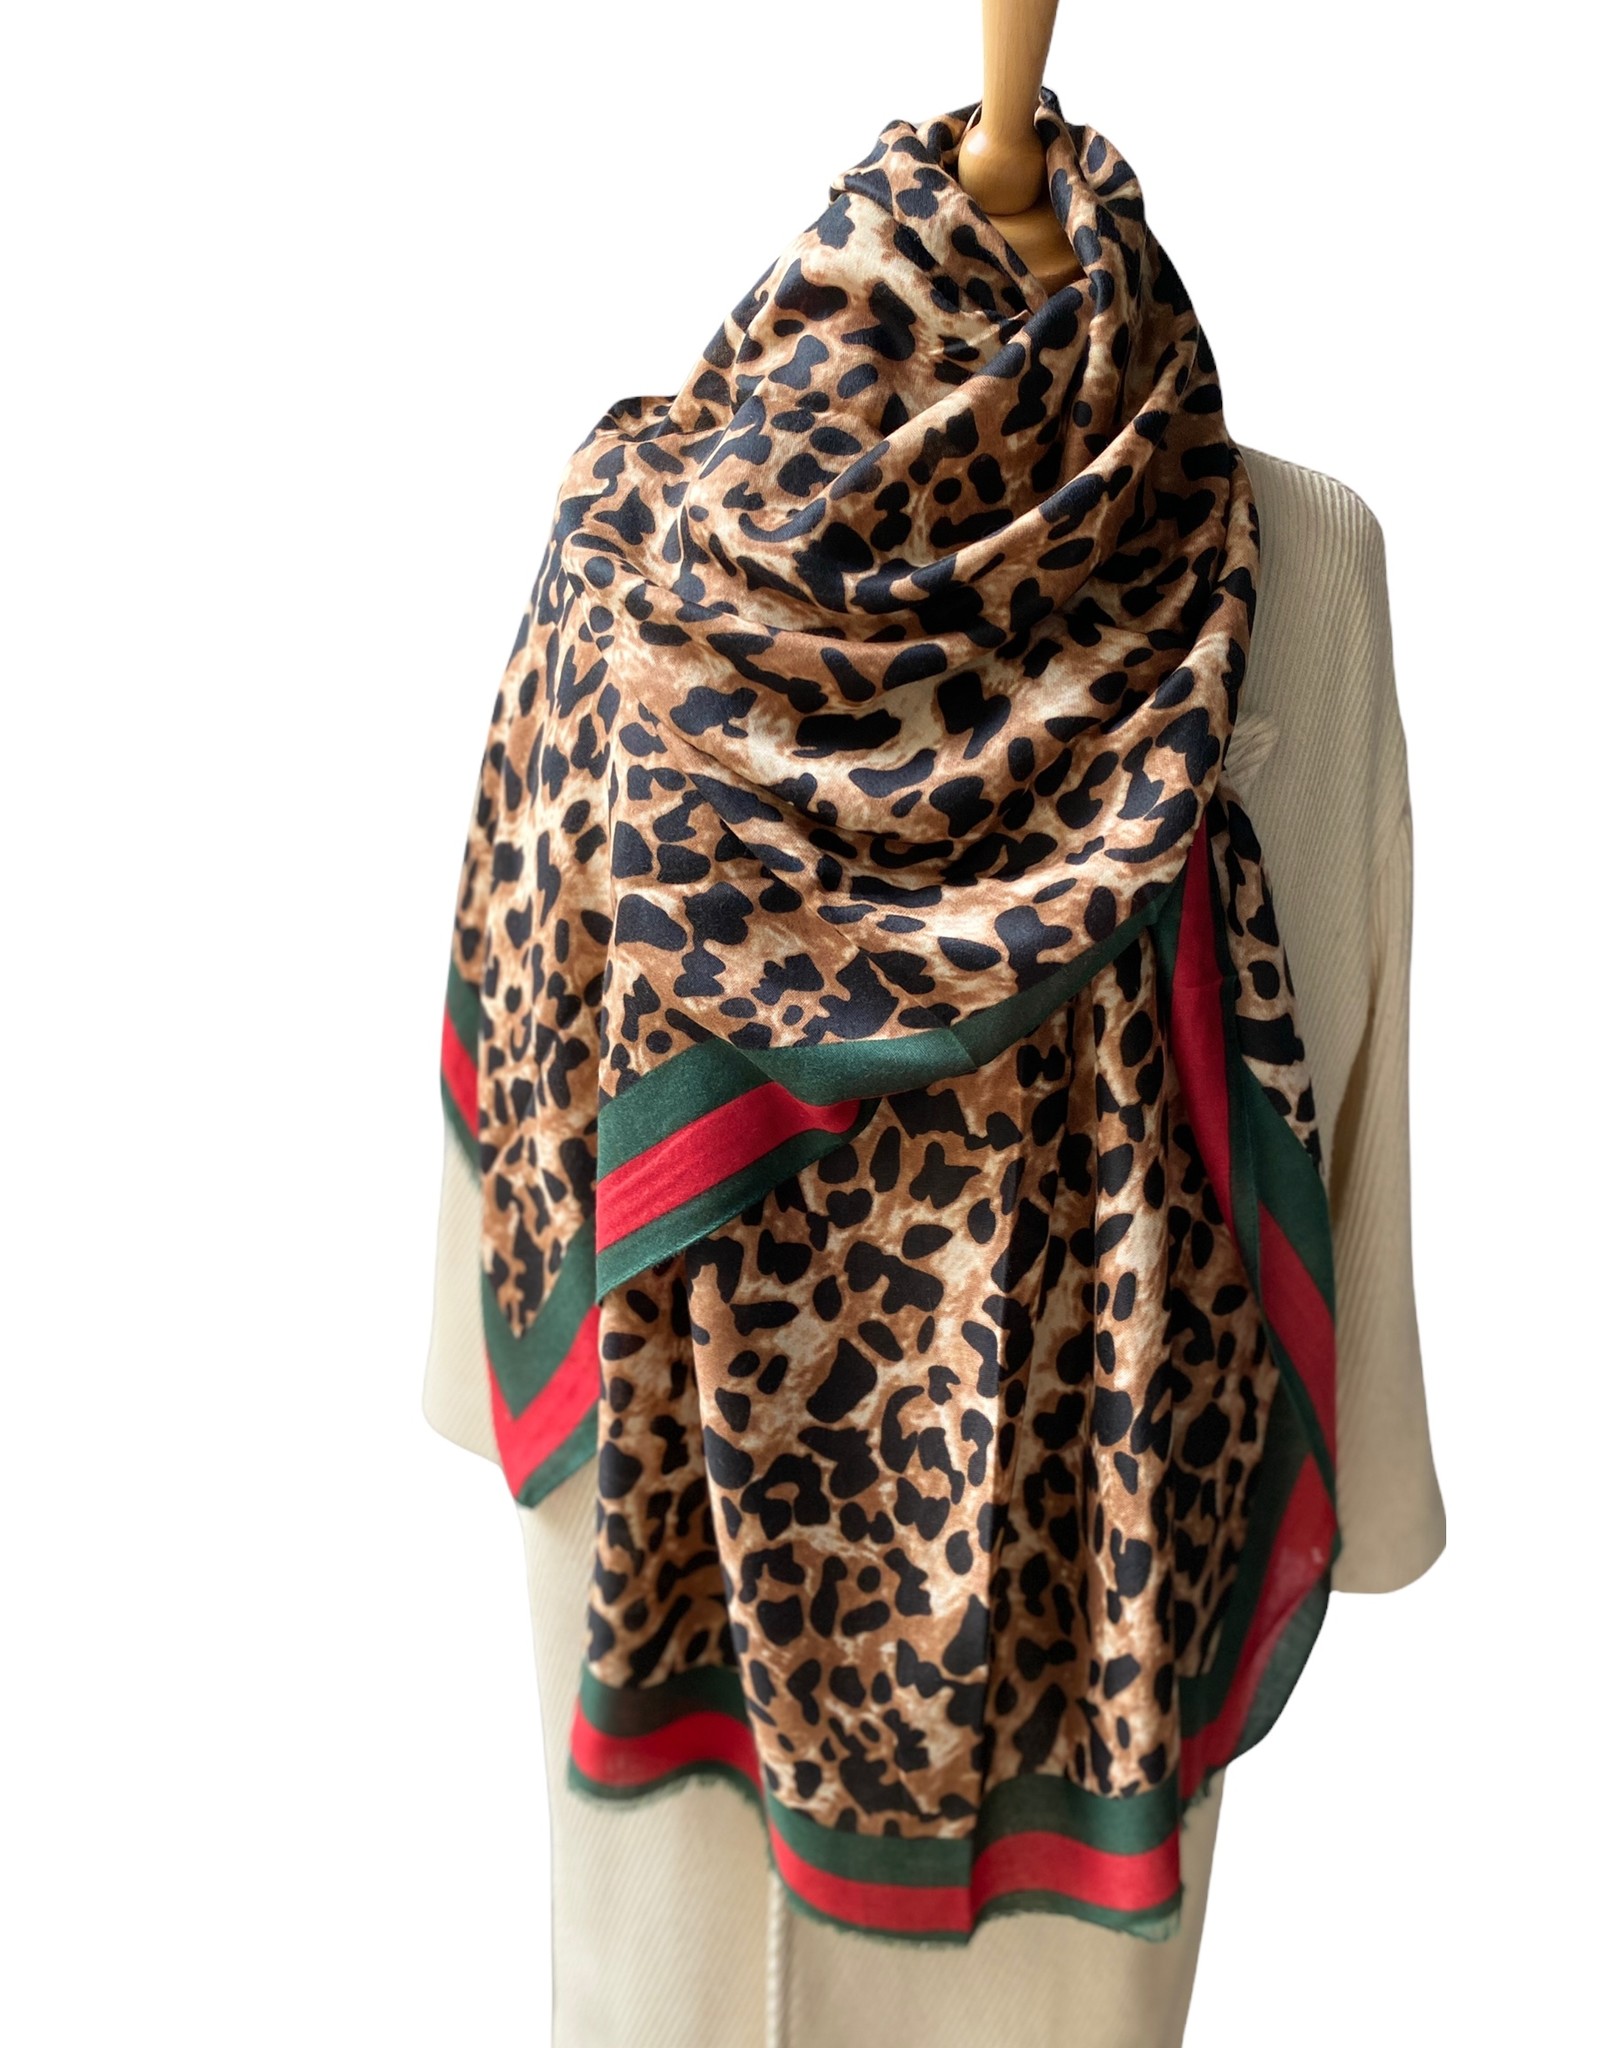 Coton scarf leopardprint with green/red stripe